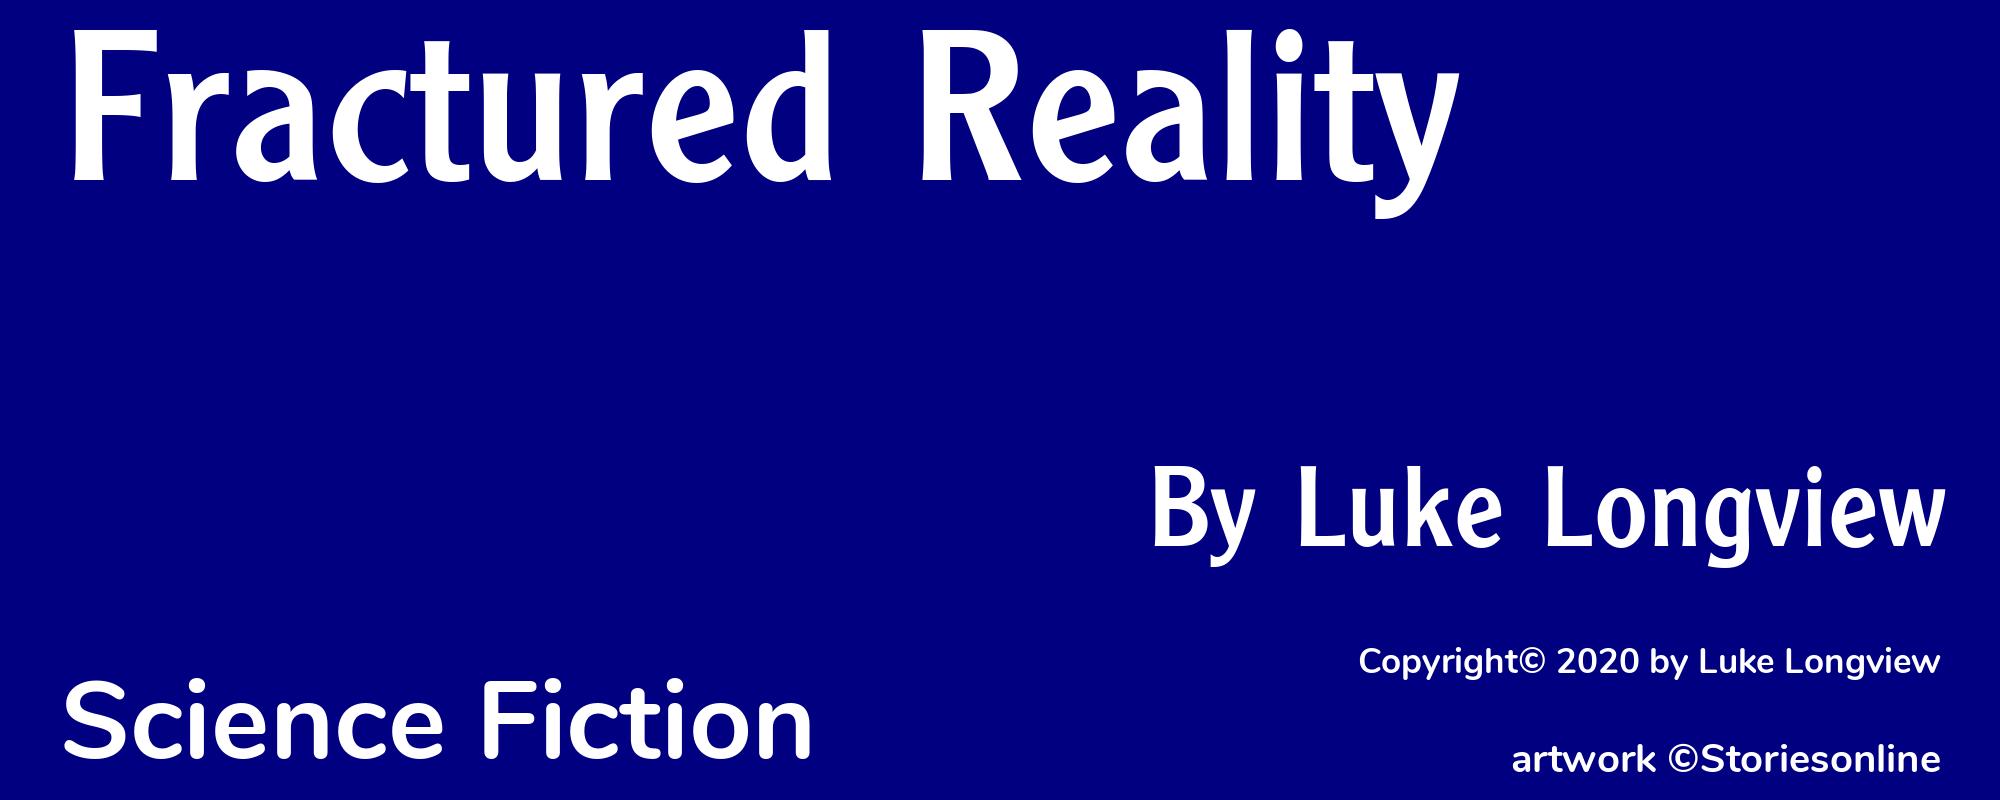 Fractured Reality - Cover